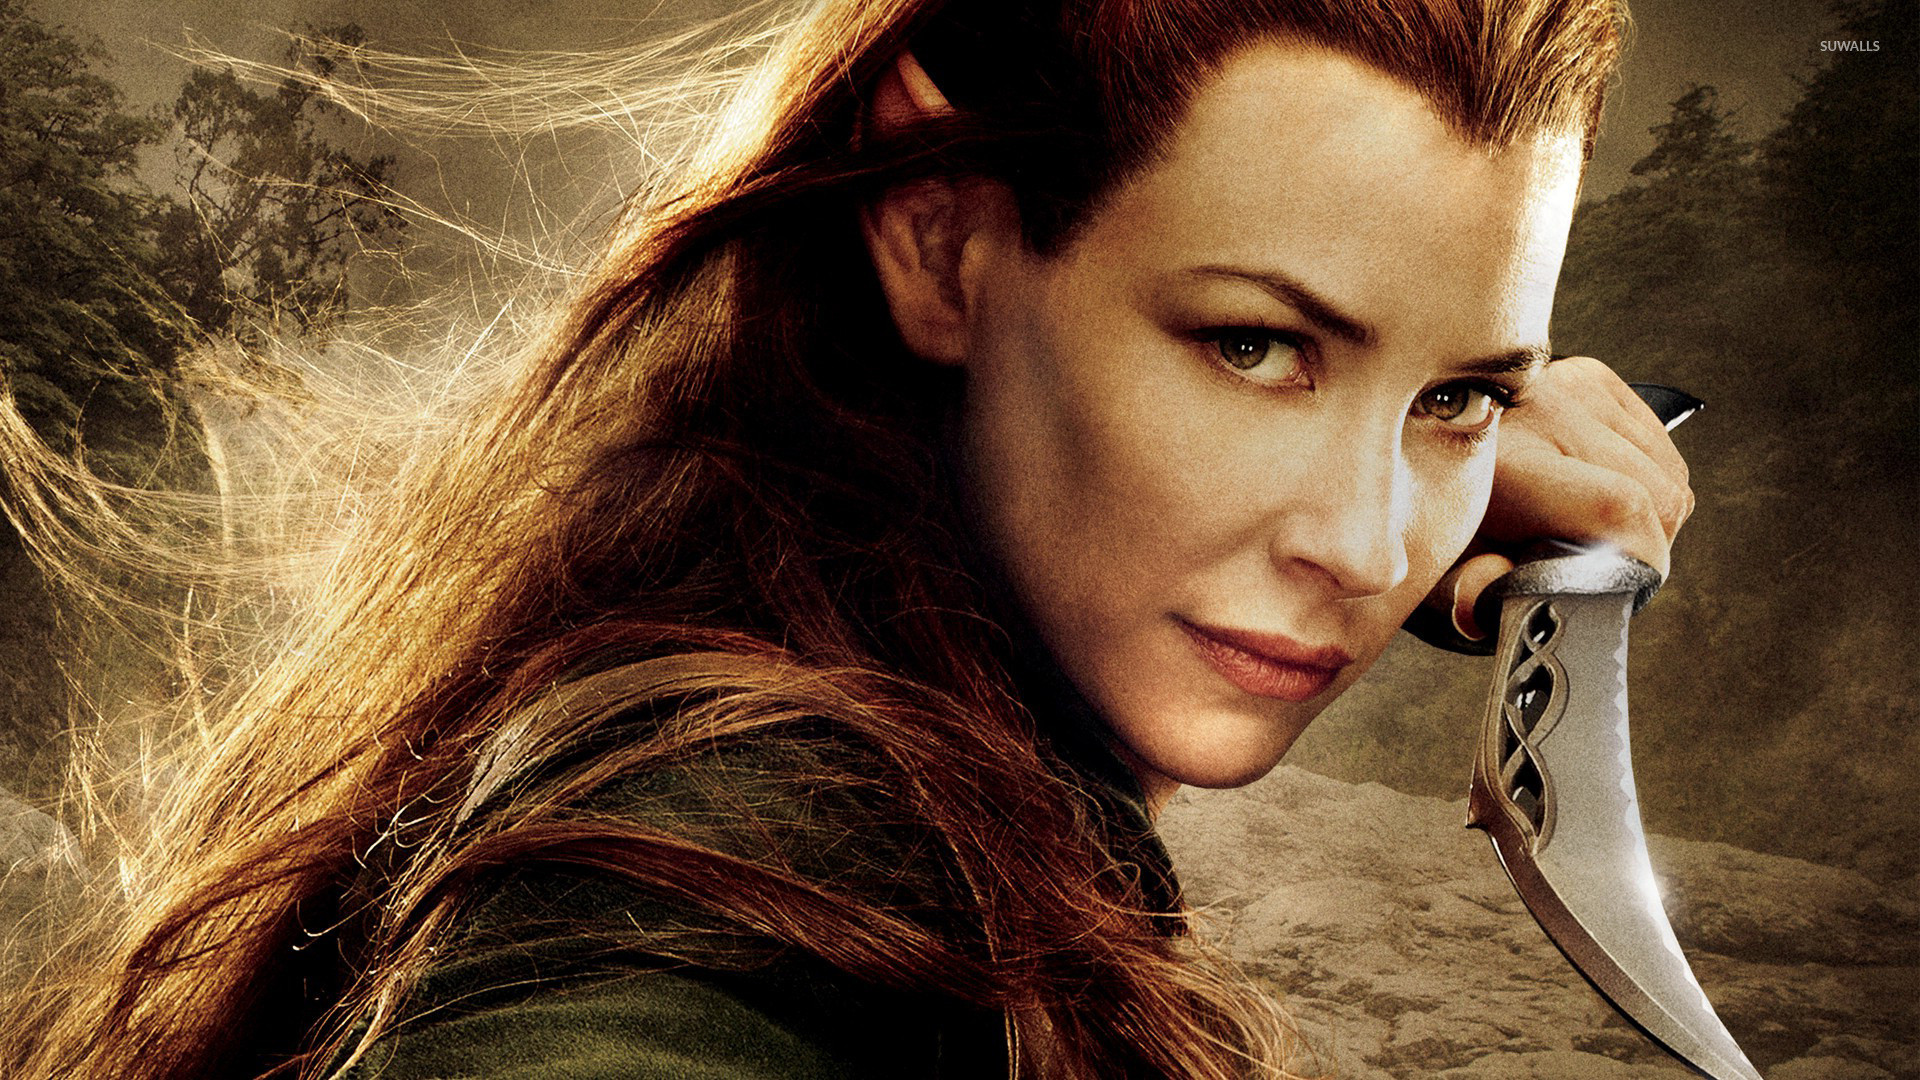 Tauriel – The Hobbit: The Desolation of Smaug wallpaper jpg